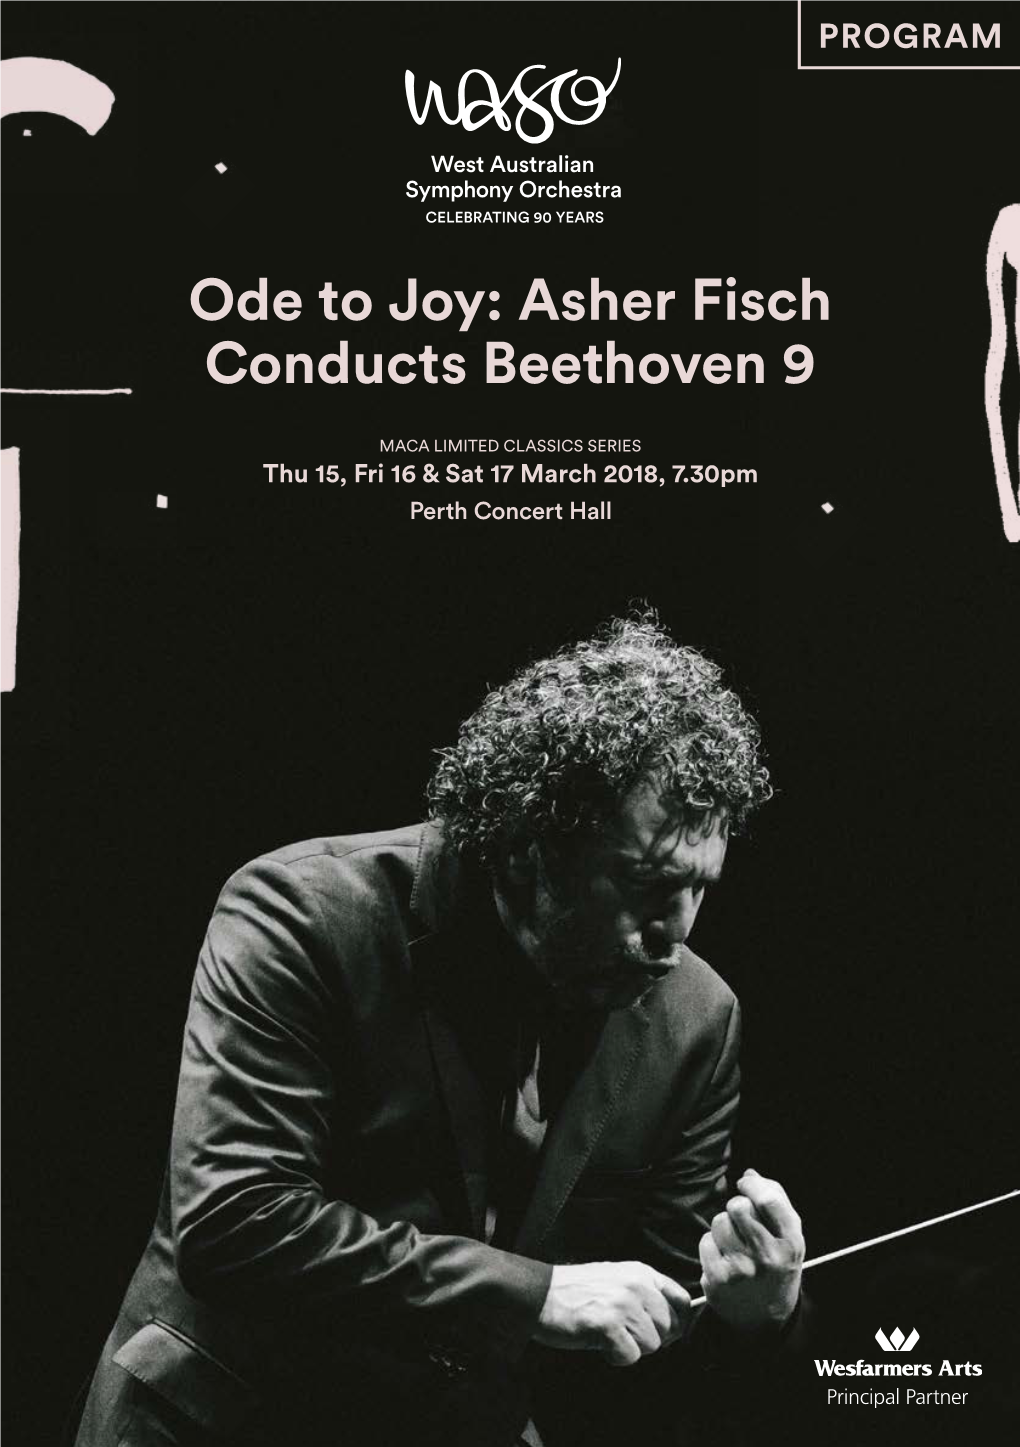 Ode to Joy: Asher Fisch Conducts Beethoven 9